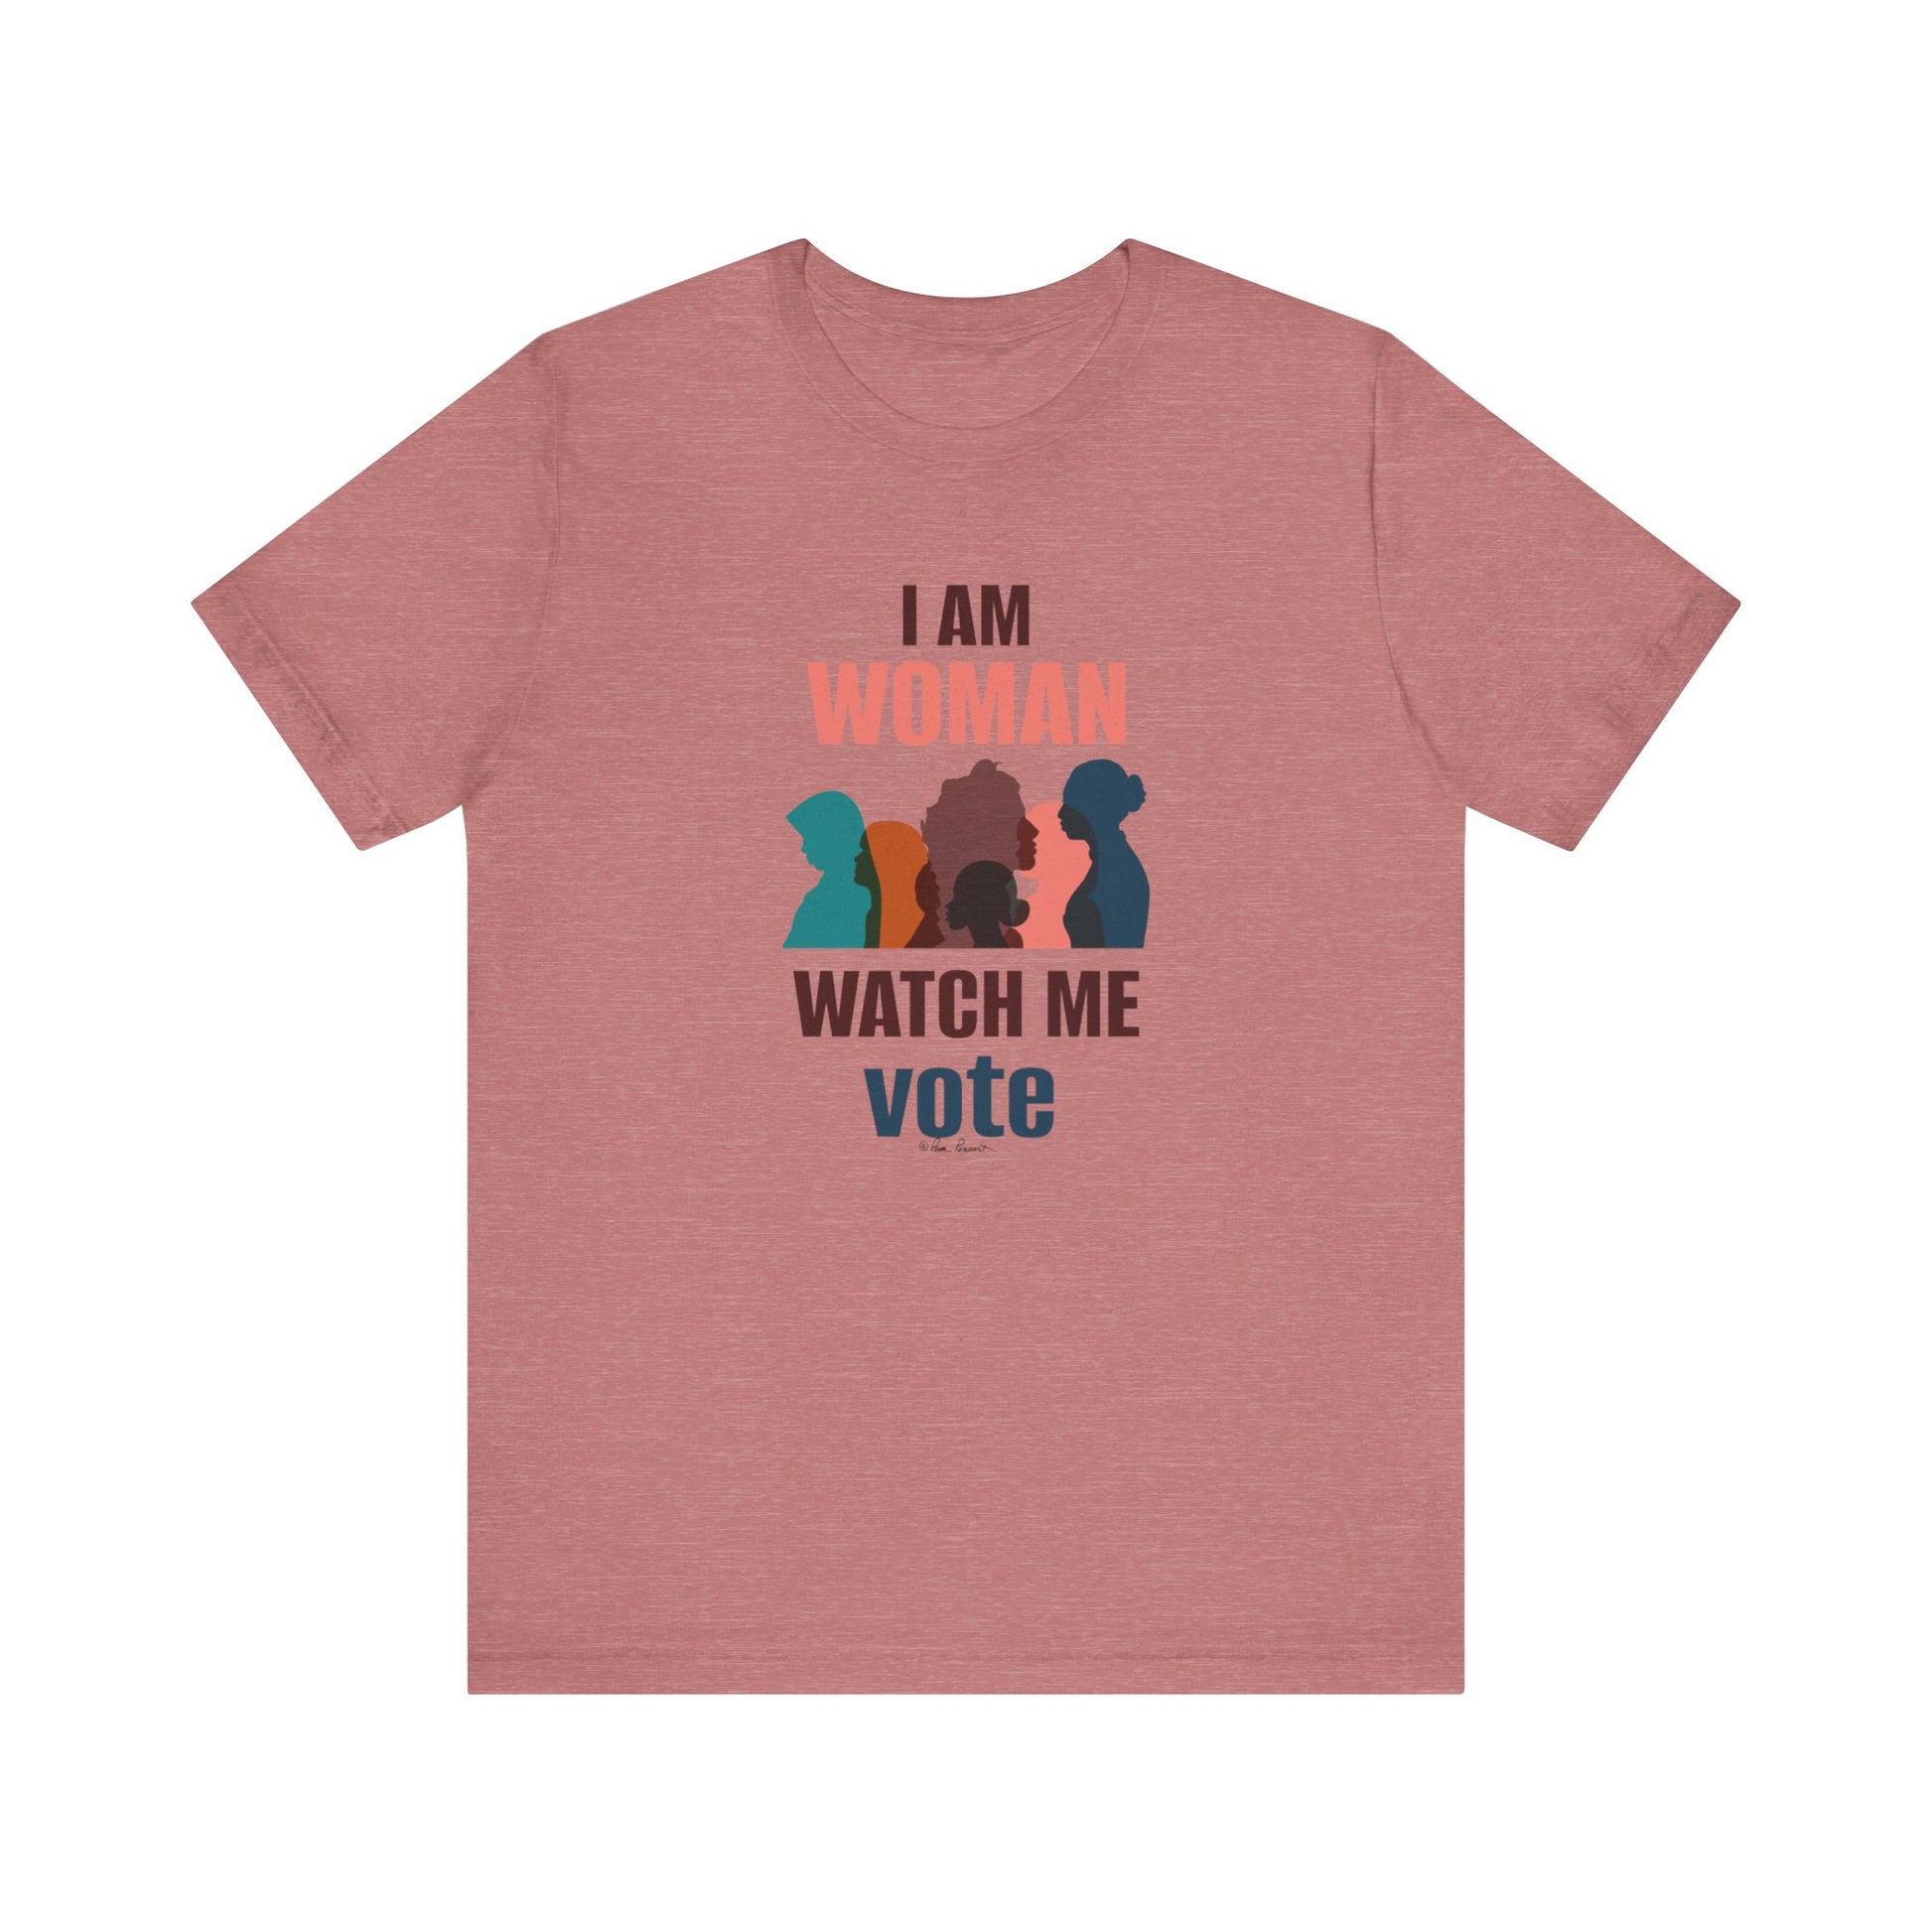 Pink Printify Voting Women's T-shirt featuring the phrase "i am woman watch me vote" in bold letters with silhouettes of diverse women's profiles above the text.